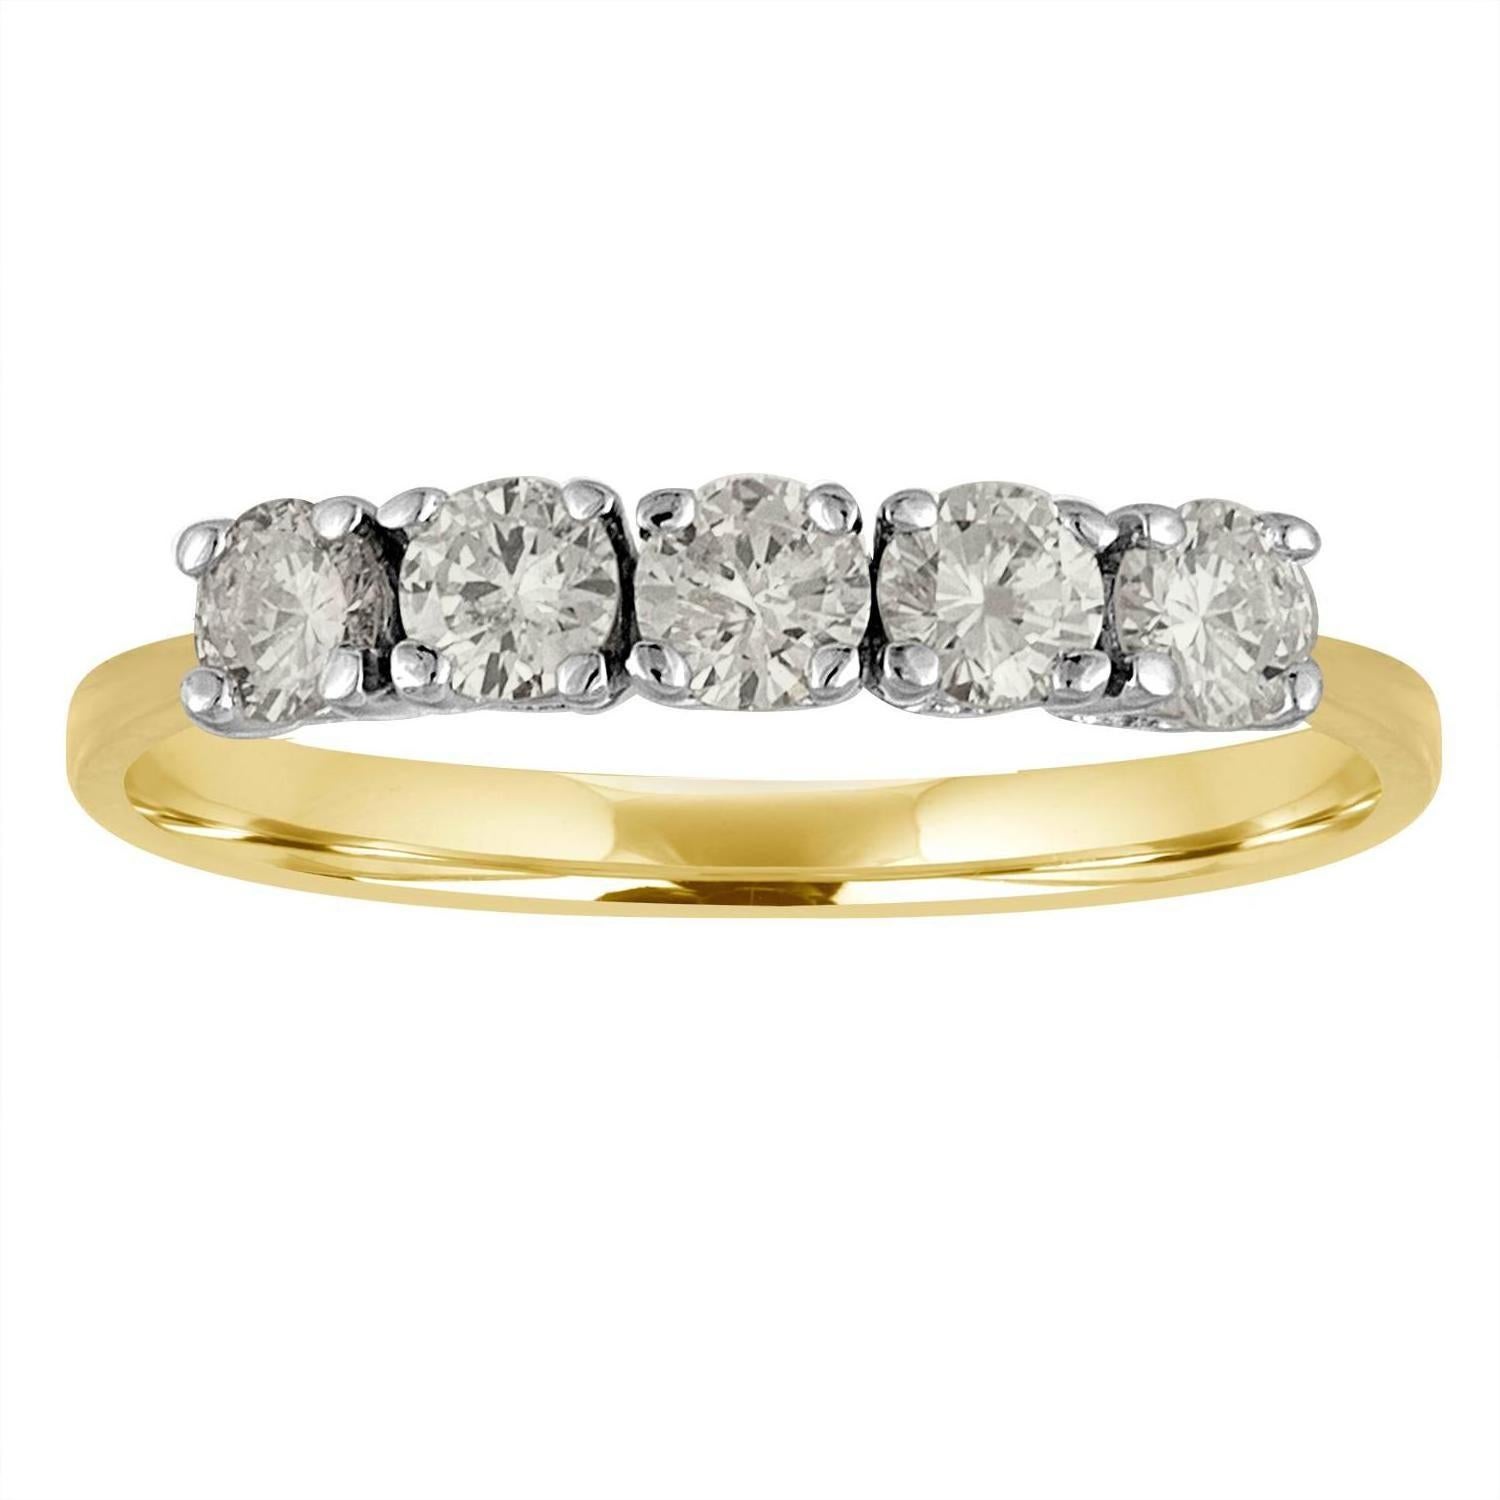 Five-Stone Diamonds Two-Color Gold Wedding Band Ring